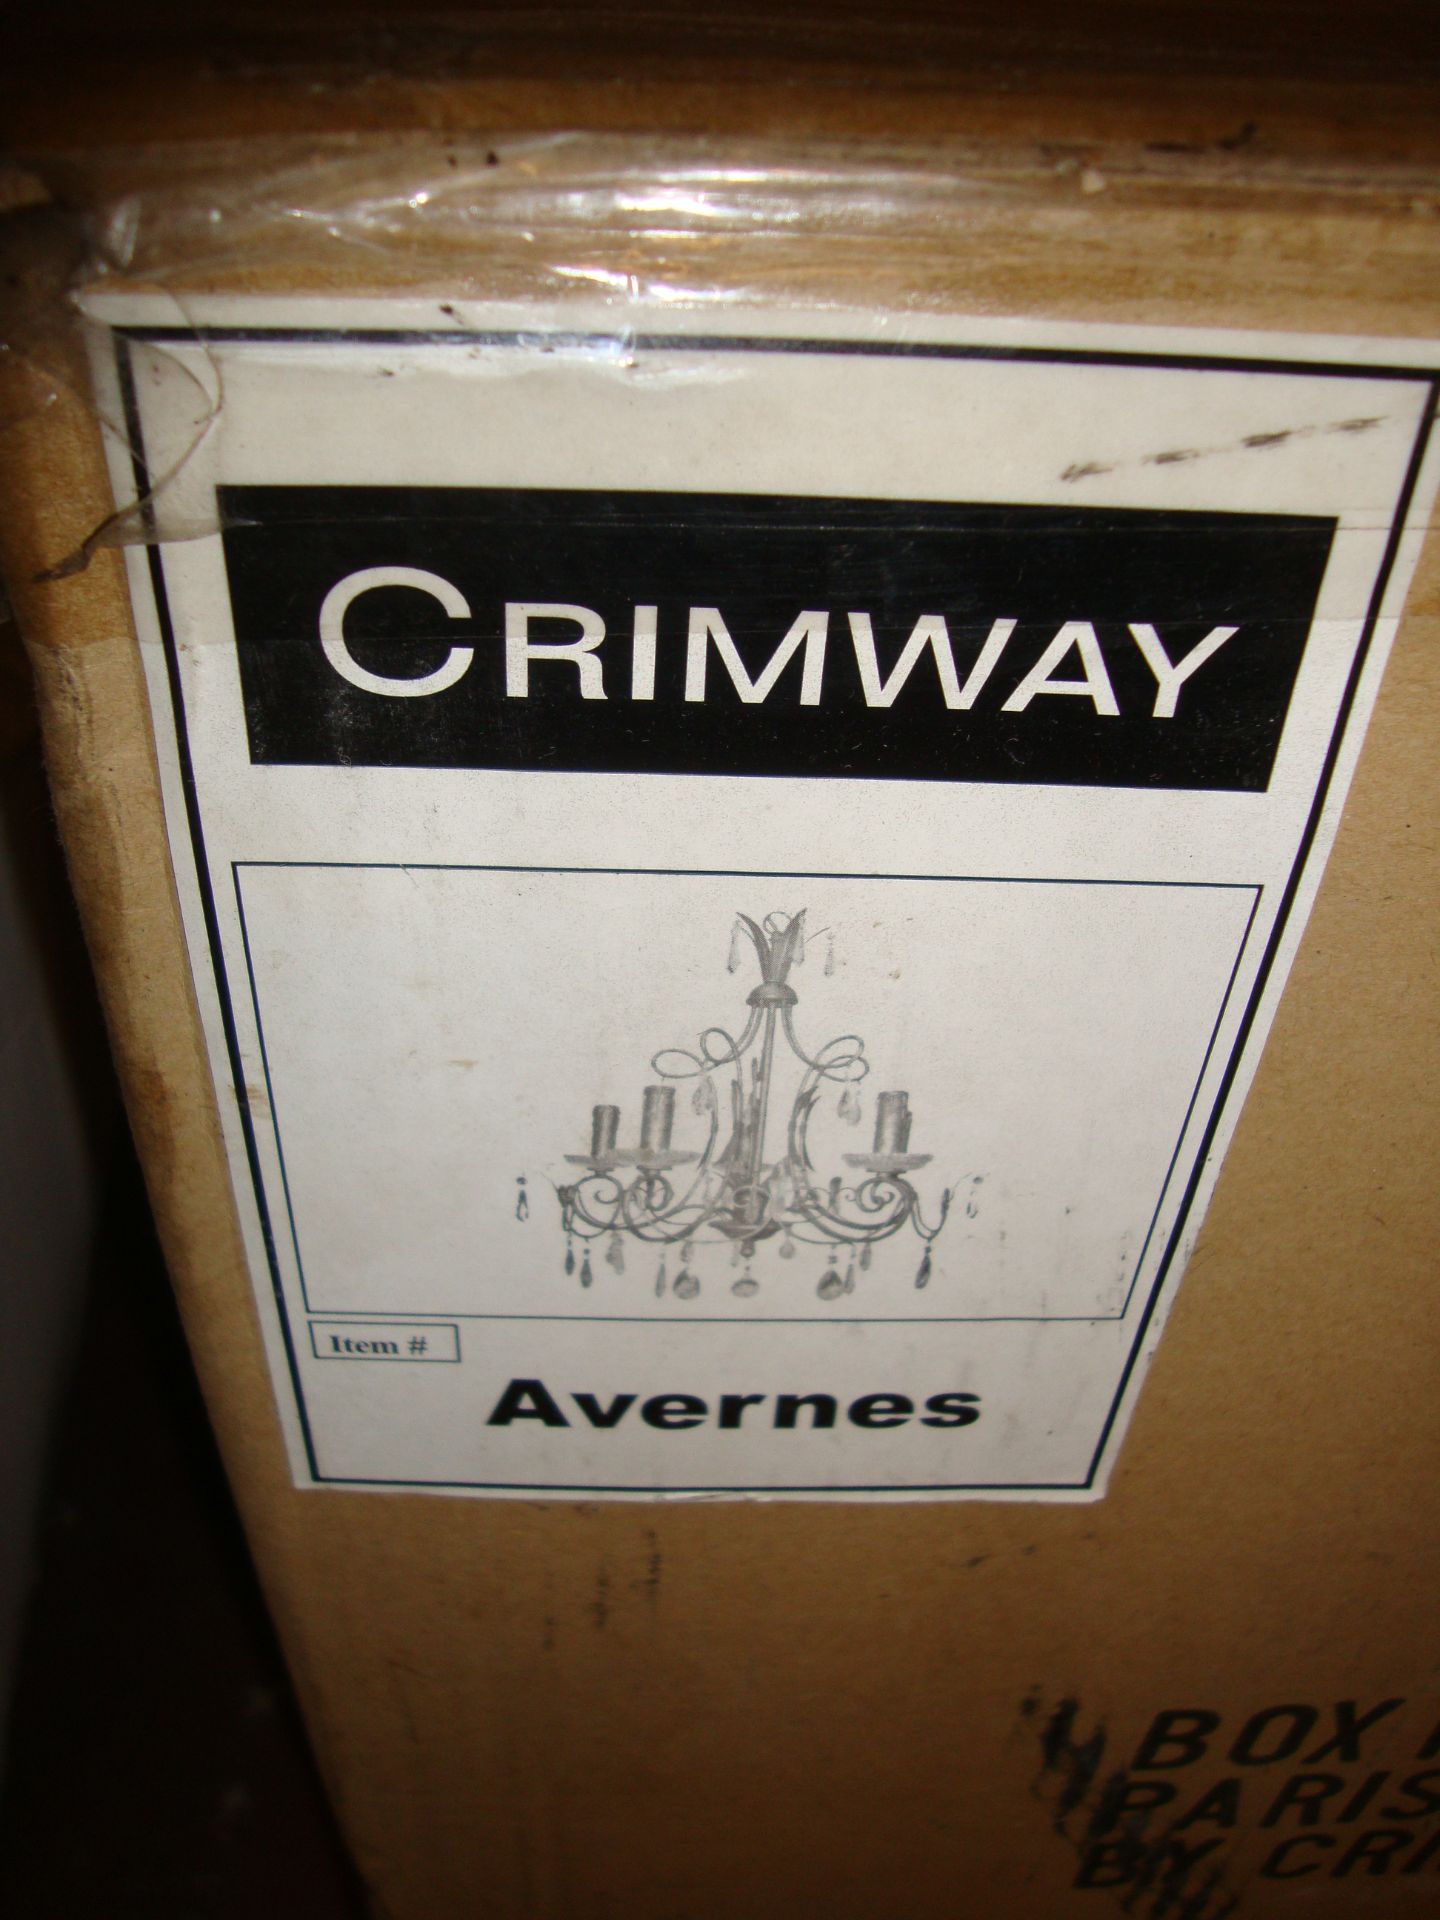 Crimway Parisienne Collection model Avernes 5 bulb light fitting - Image 2 of 2